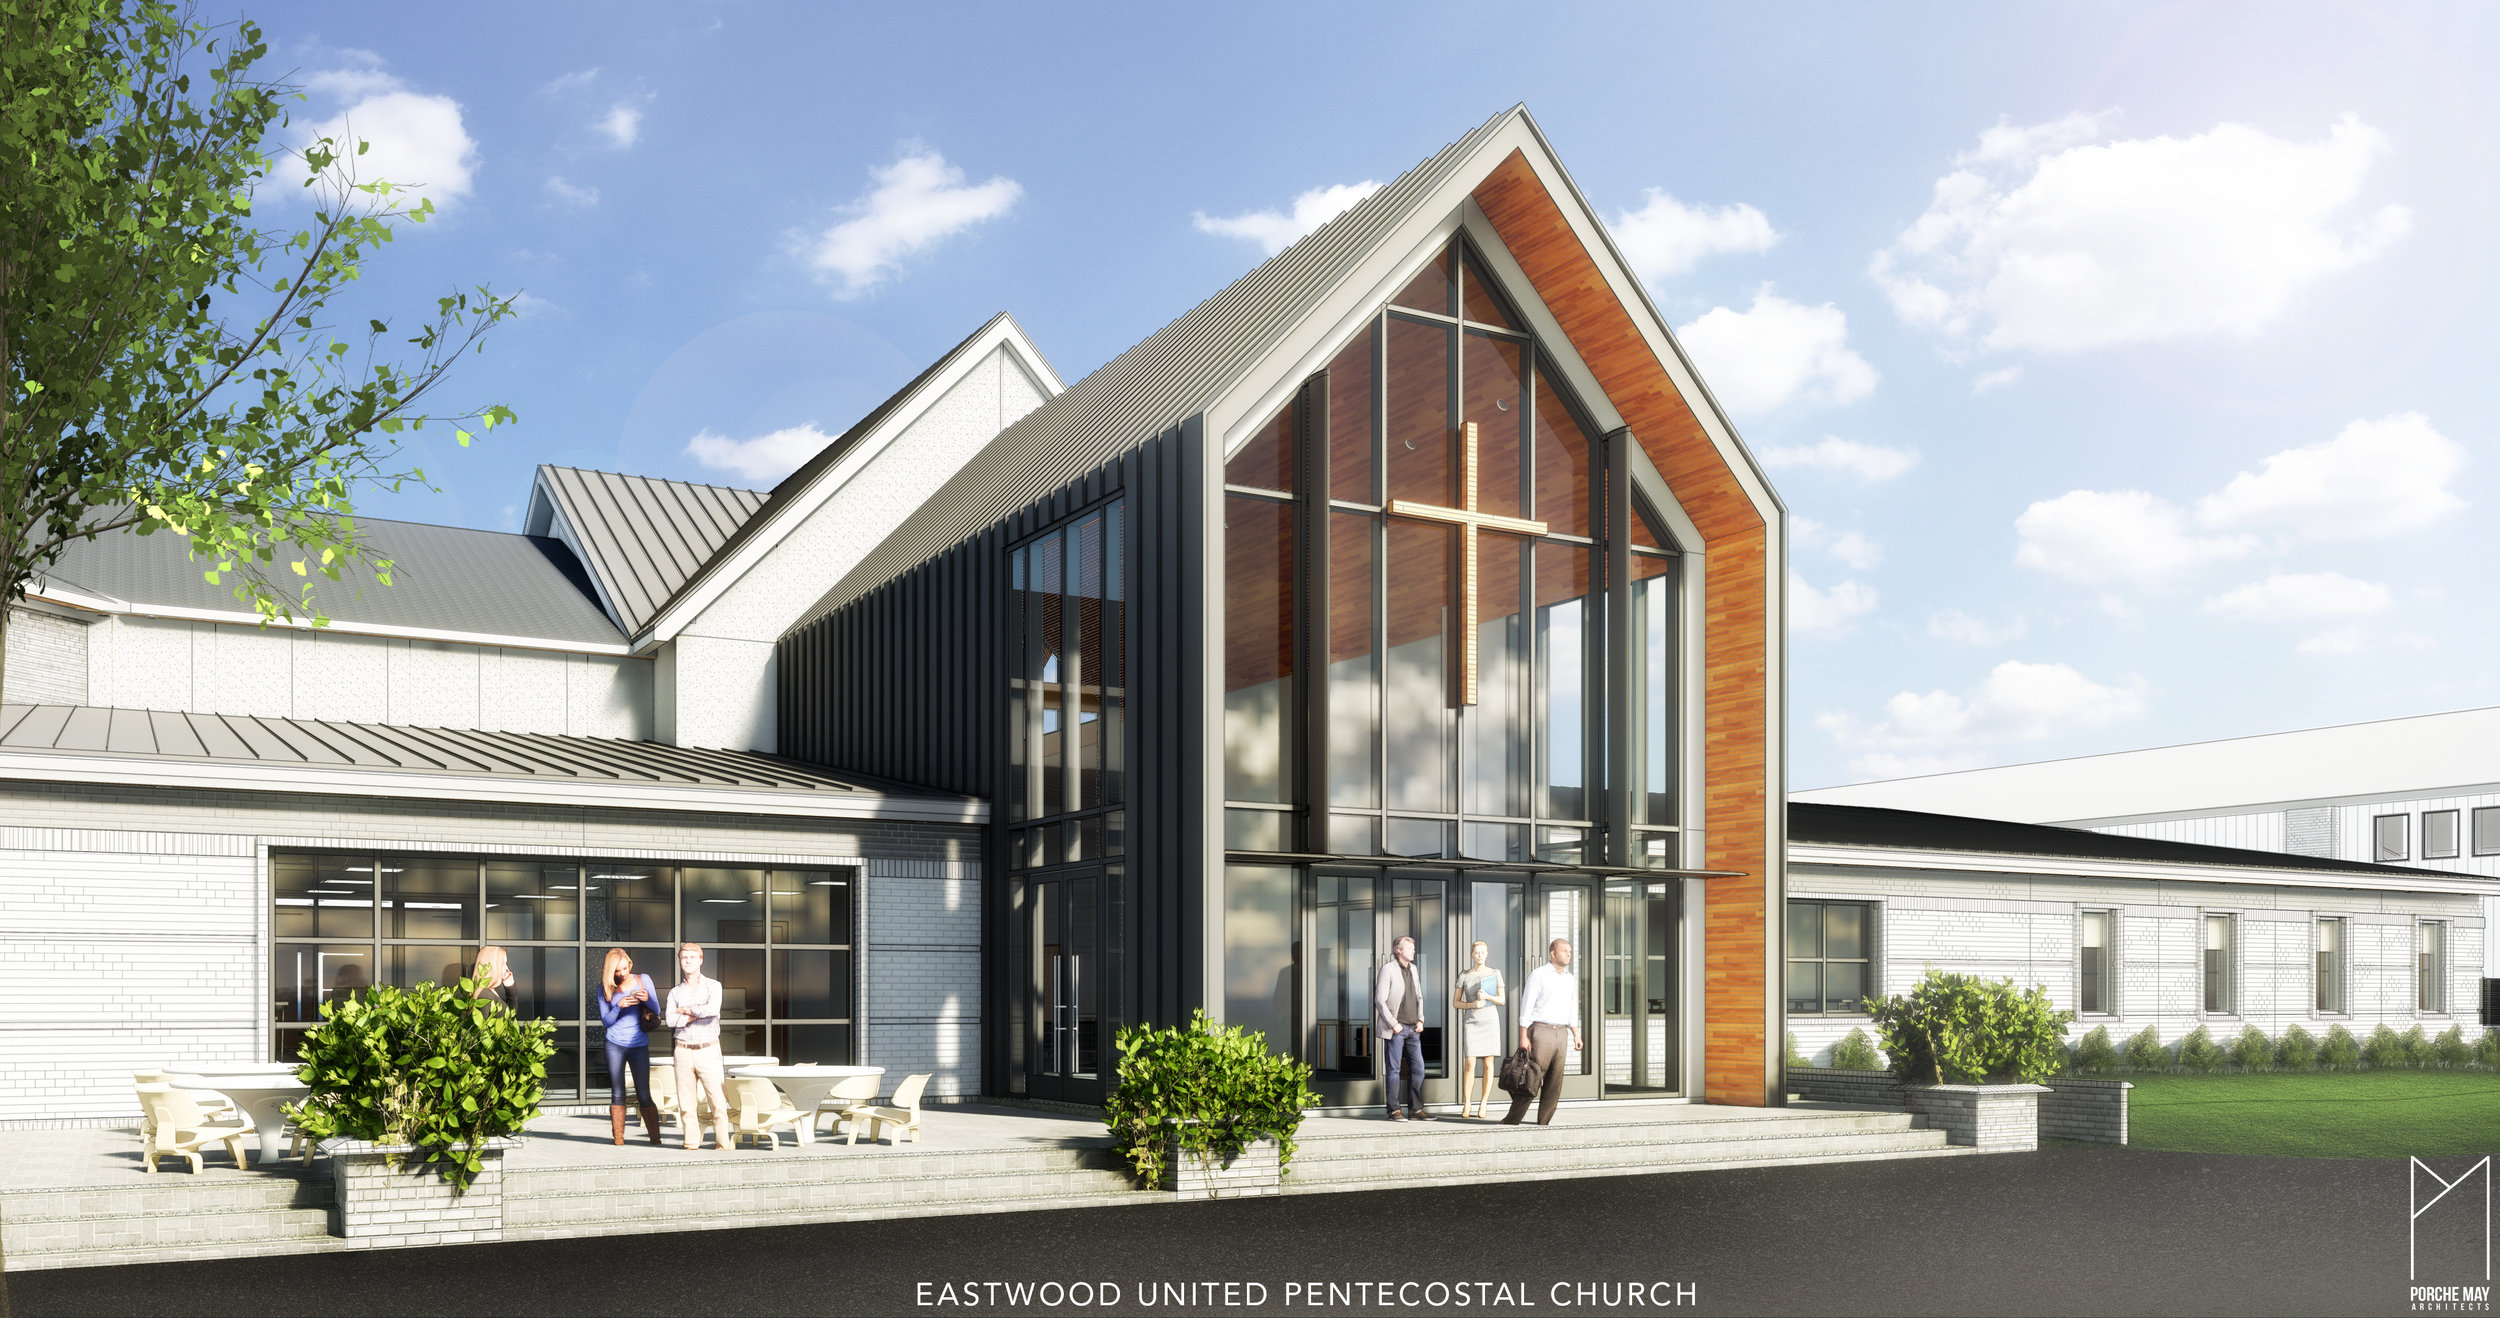  A new Grand Atrium, Bookstore, Daycare and Administrative offices highlight this new renovation and addition of an existing church damaged by fire. 